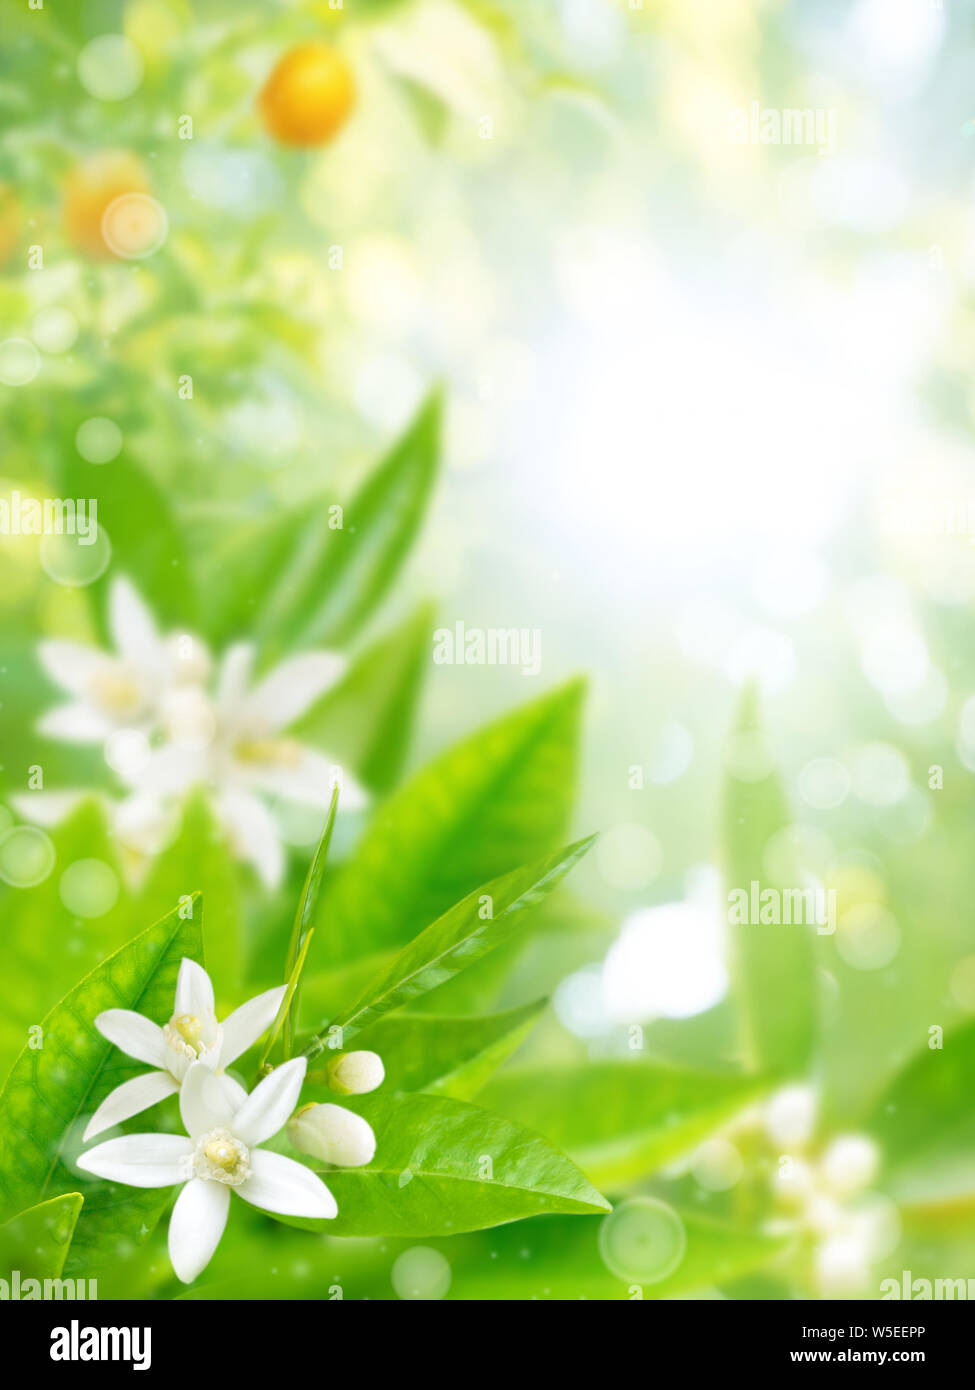 Orange garden in bloom. Neroli fragrant flowers and ripe fruits. Lush foliage with water drops. Vertical blurred background with copy space. Stock Photo